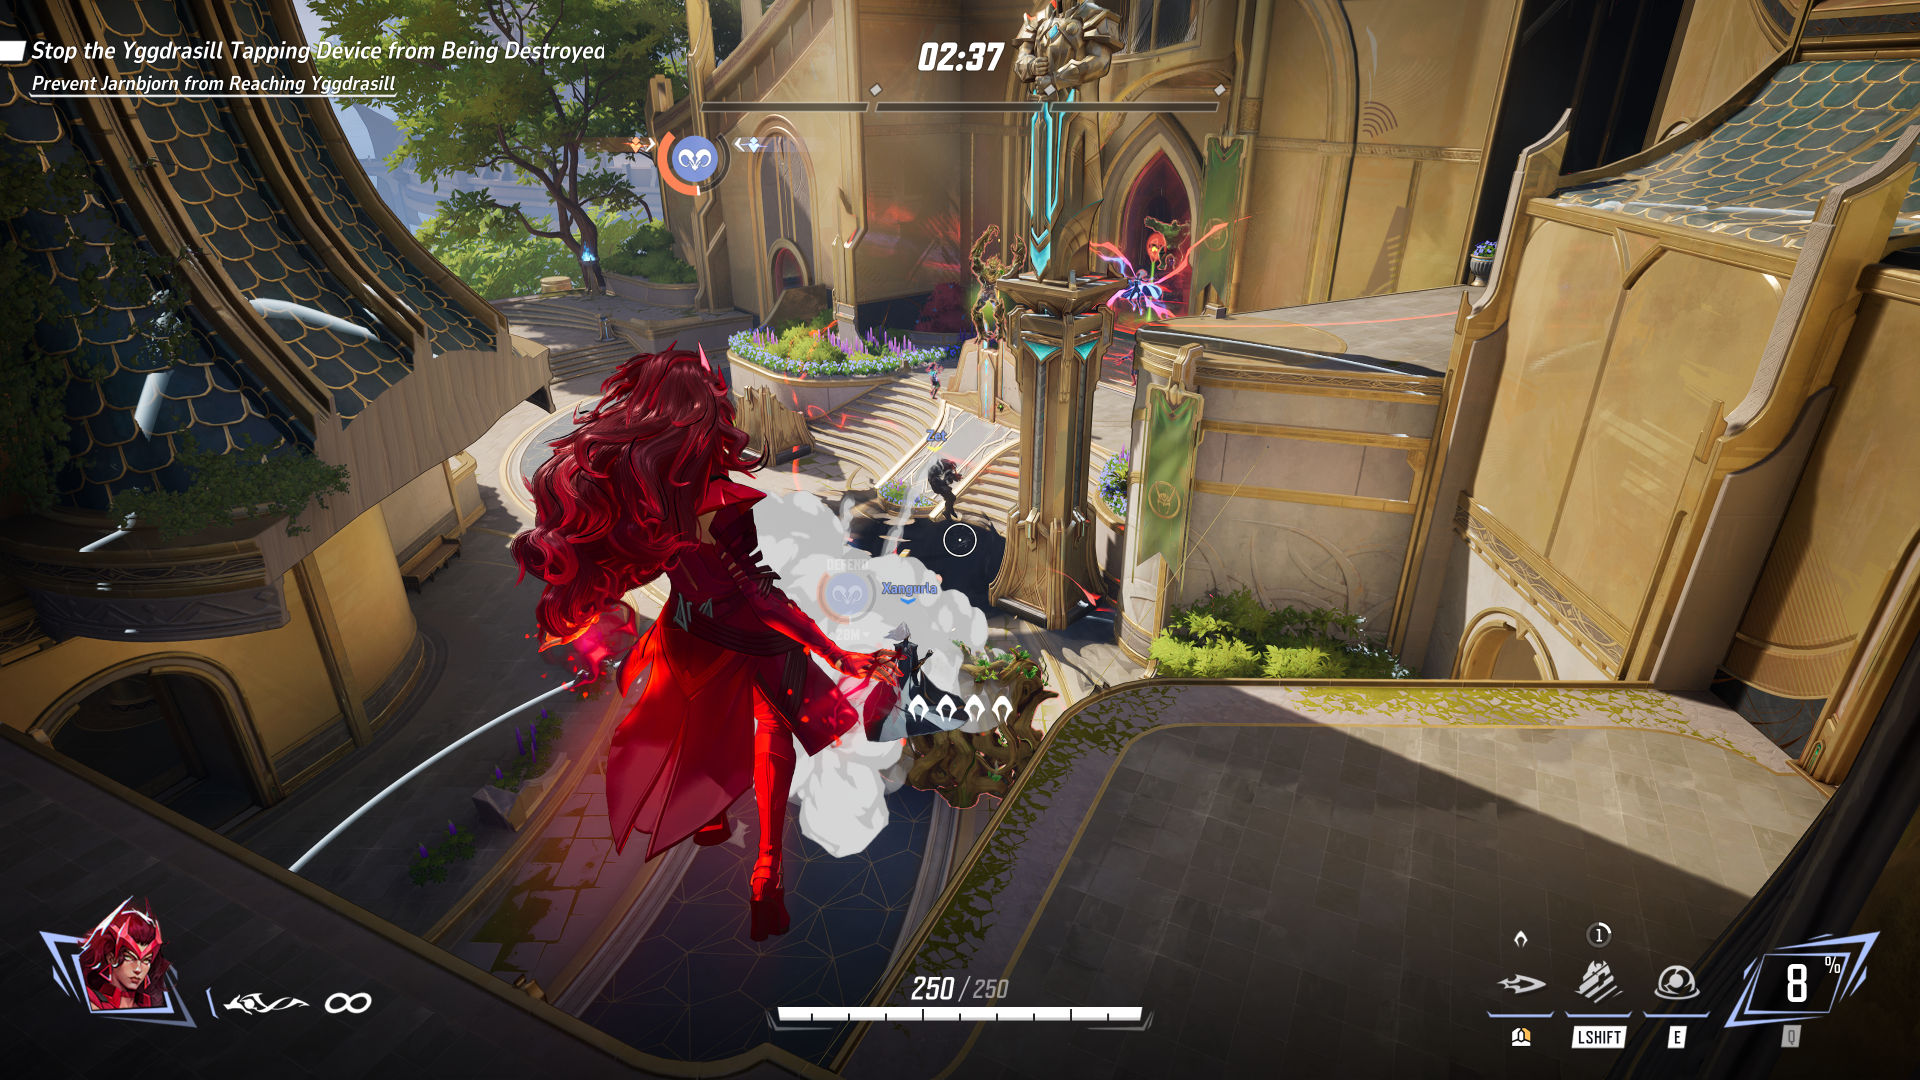 Screenshot of a Scarlet Witch character hovering above player characters in a bright multiplayer level